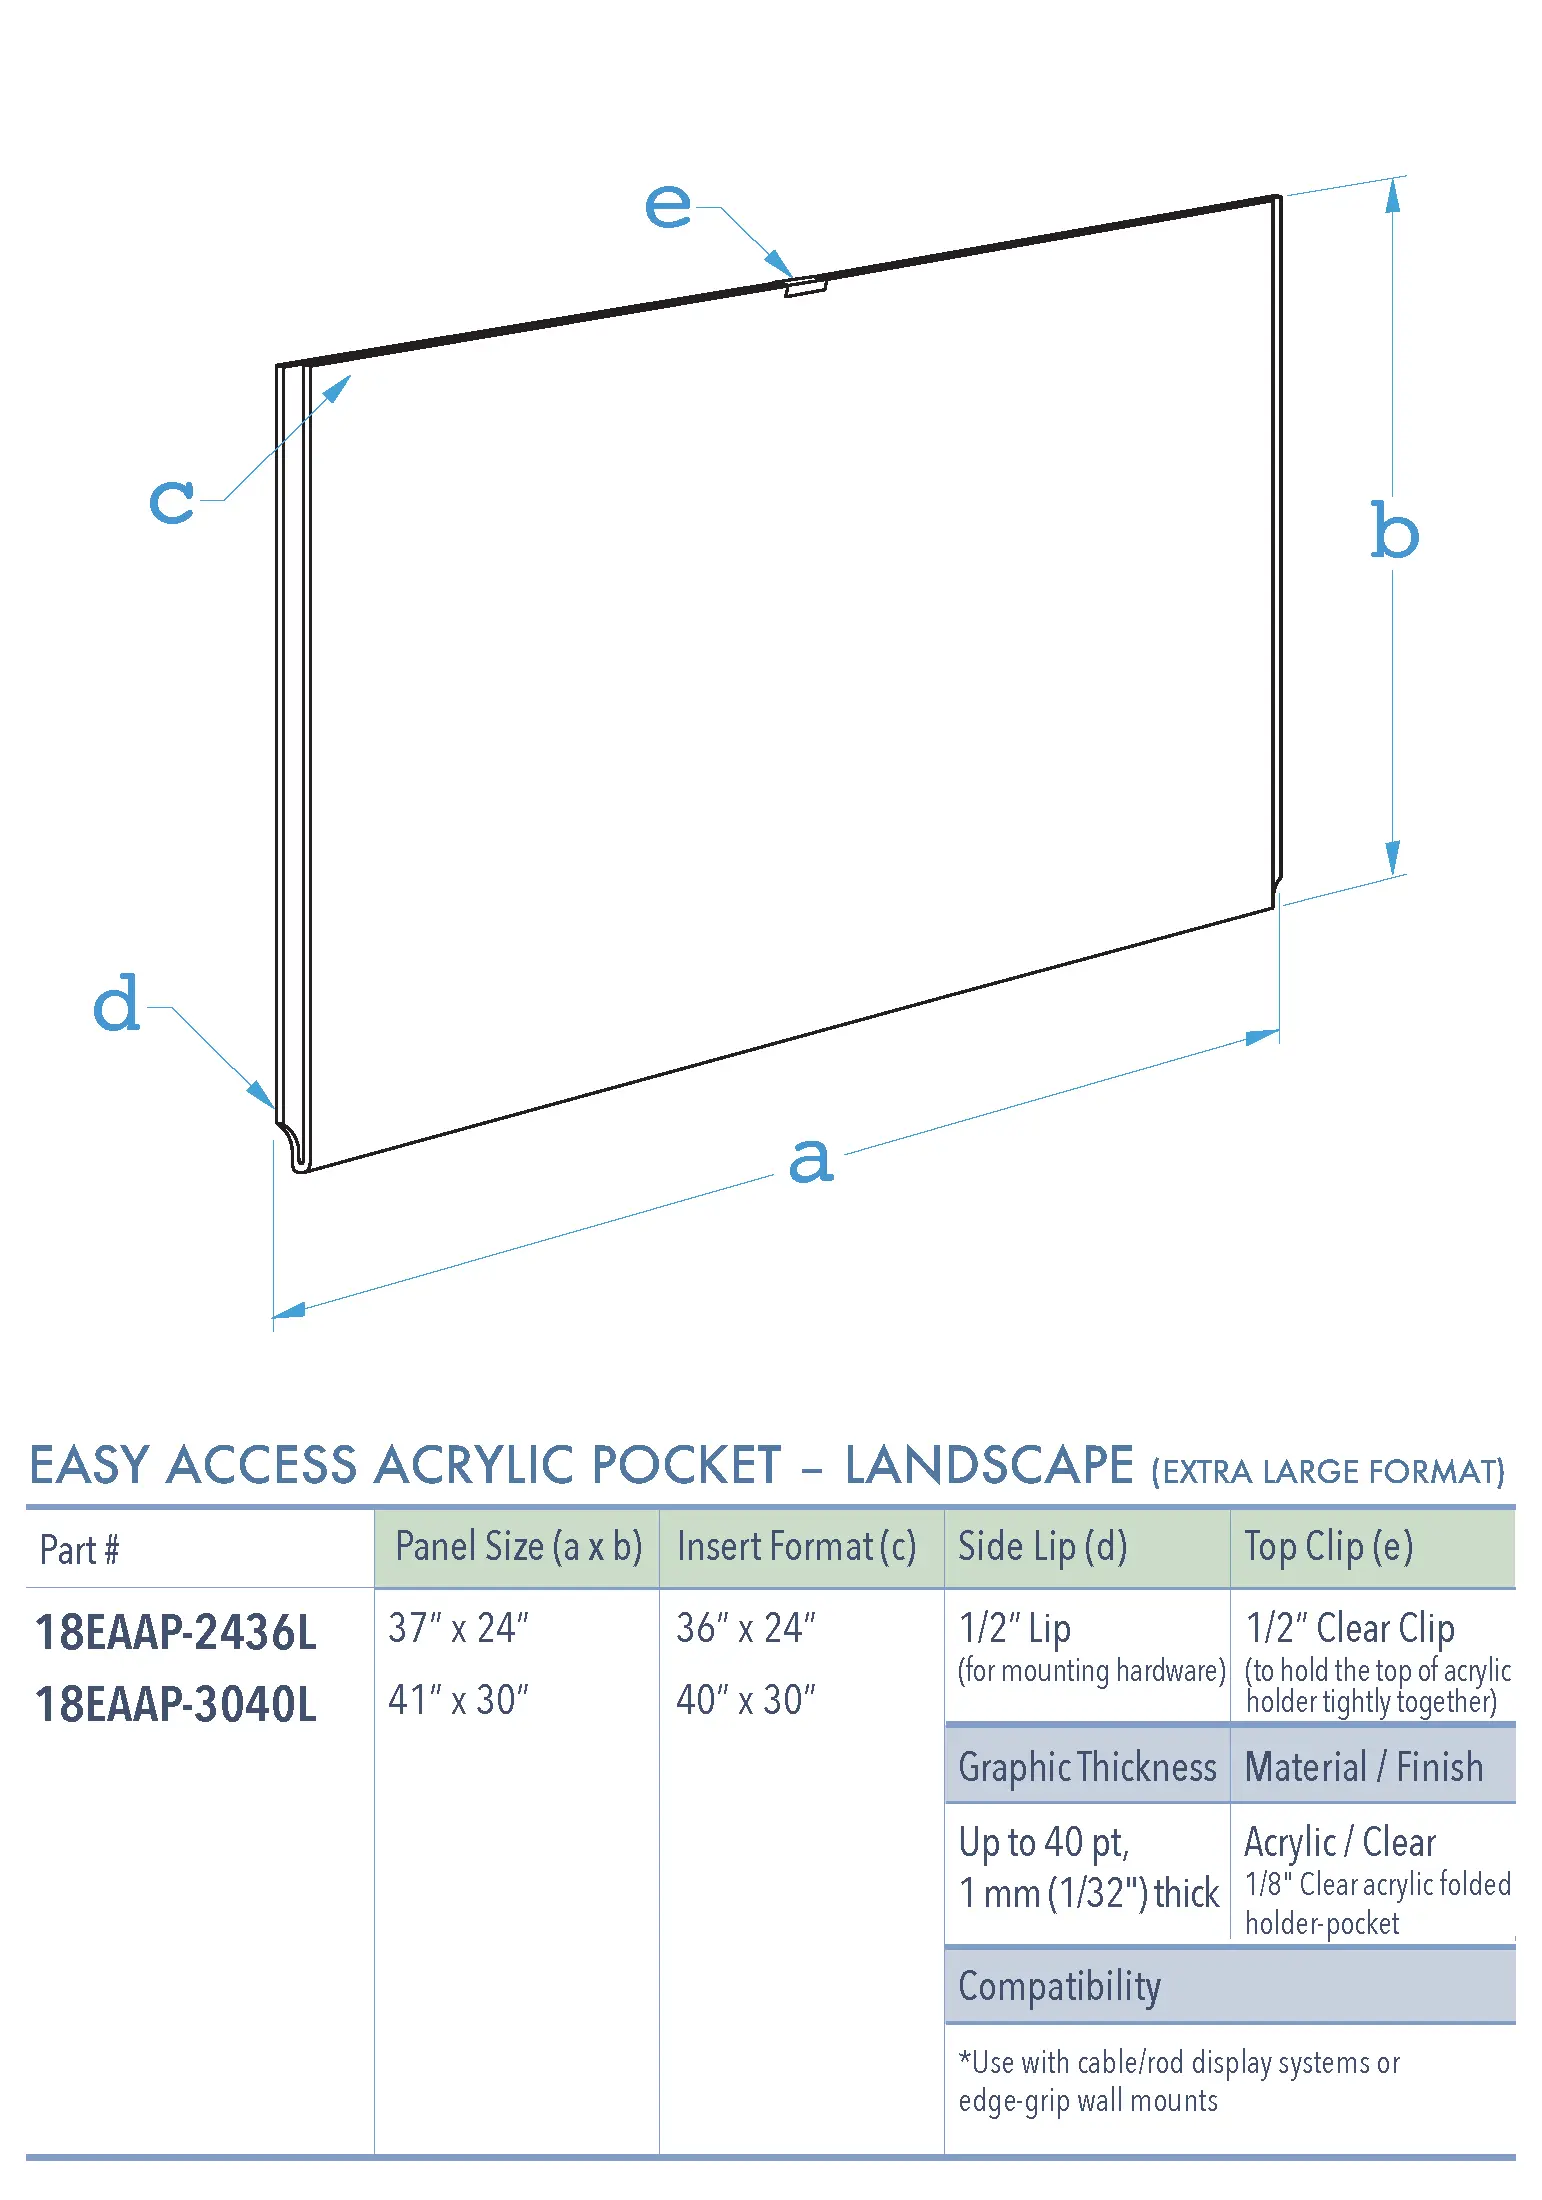 Specifications for 18EAAP-INSERT-LANDSCAPE-XL